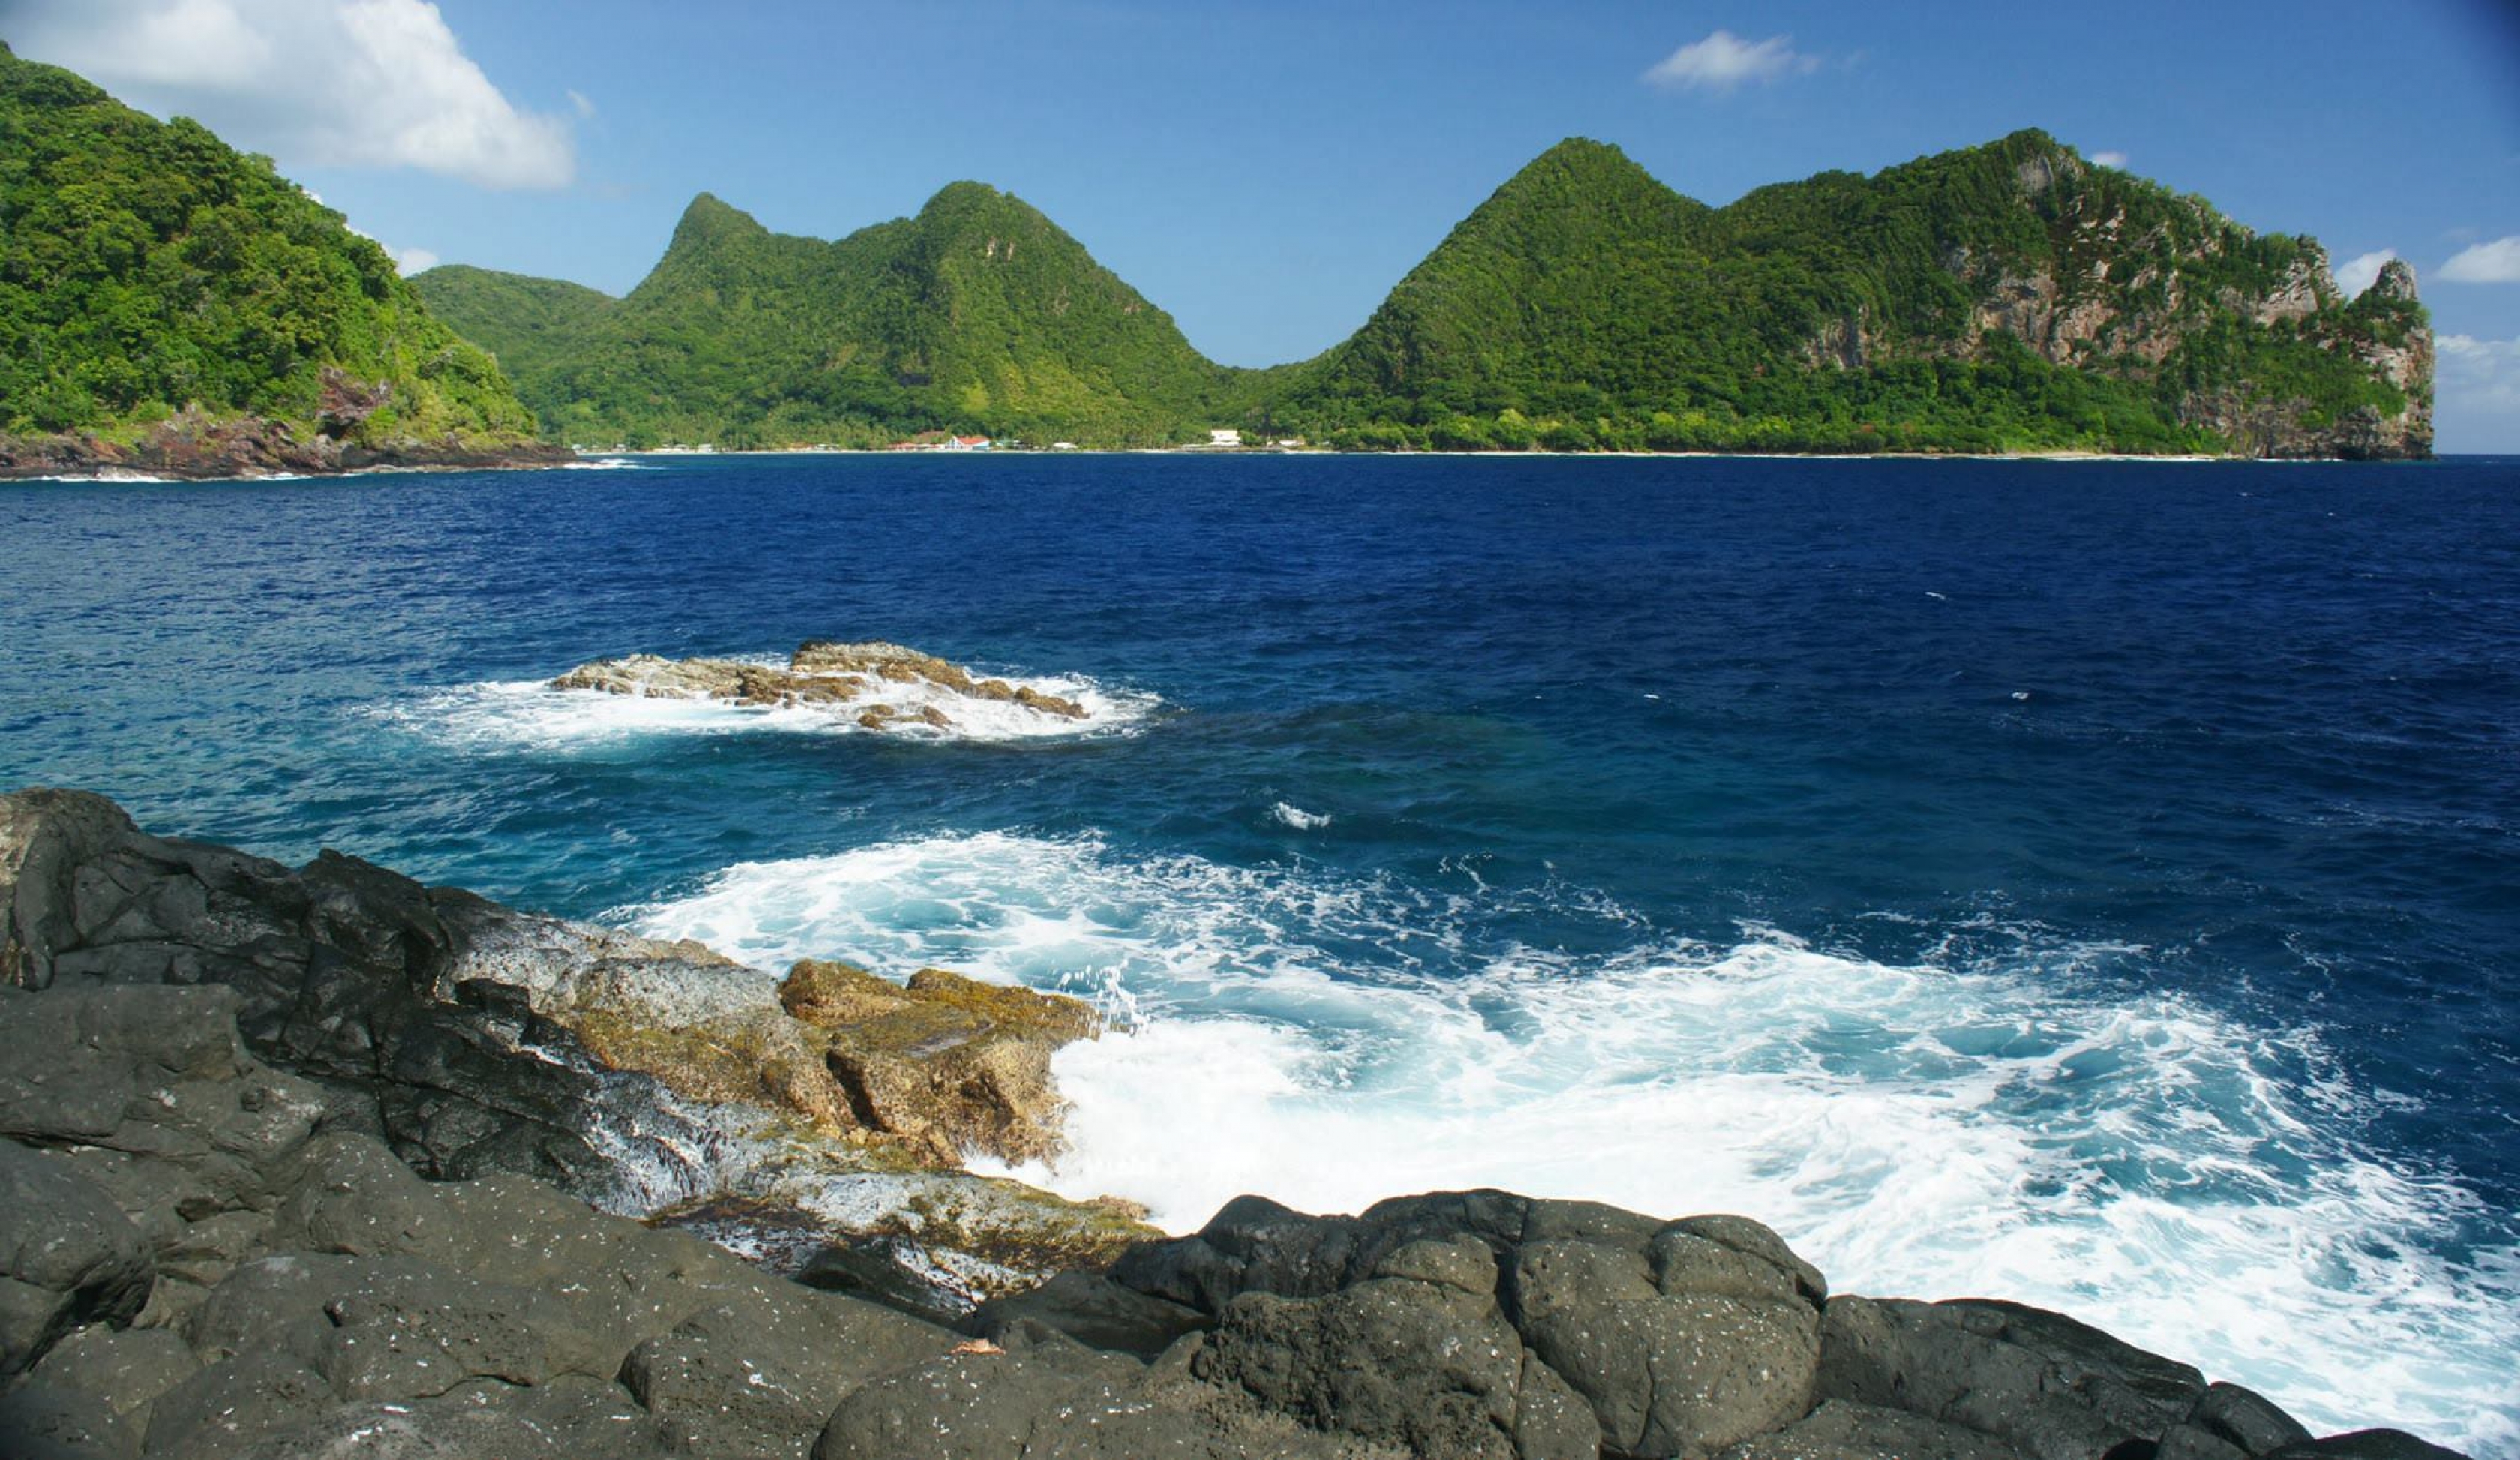 The beach at American Samoa National Park is beautiful.